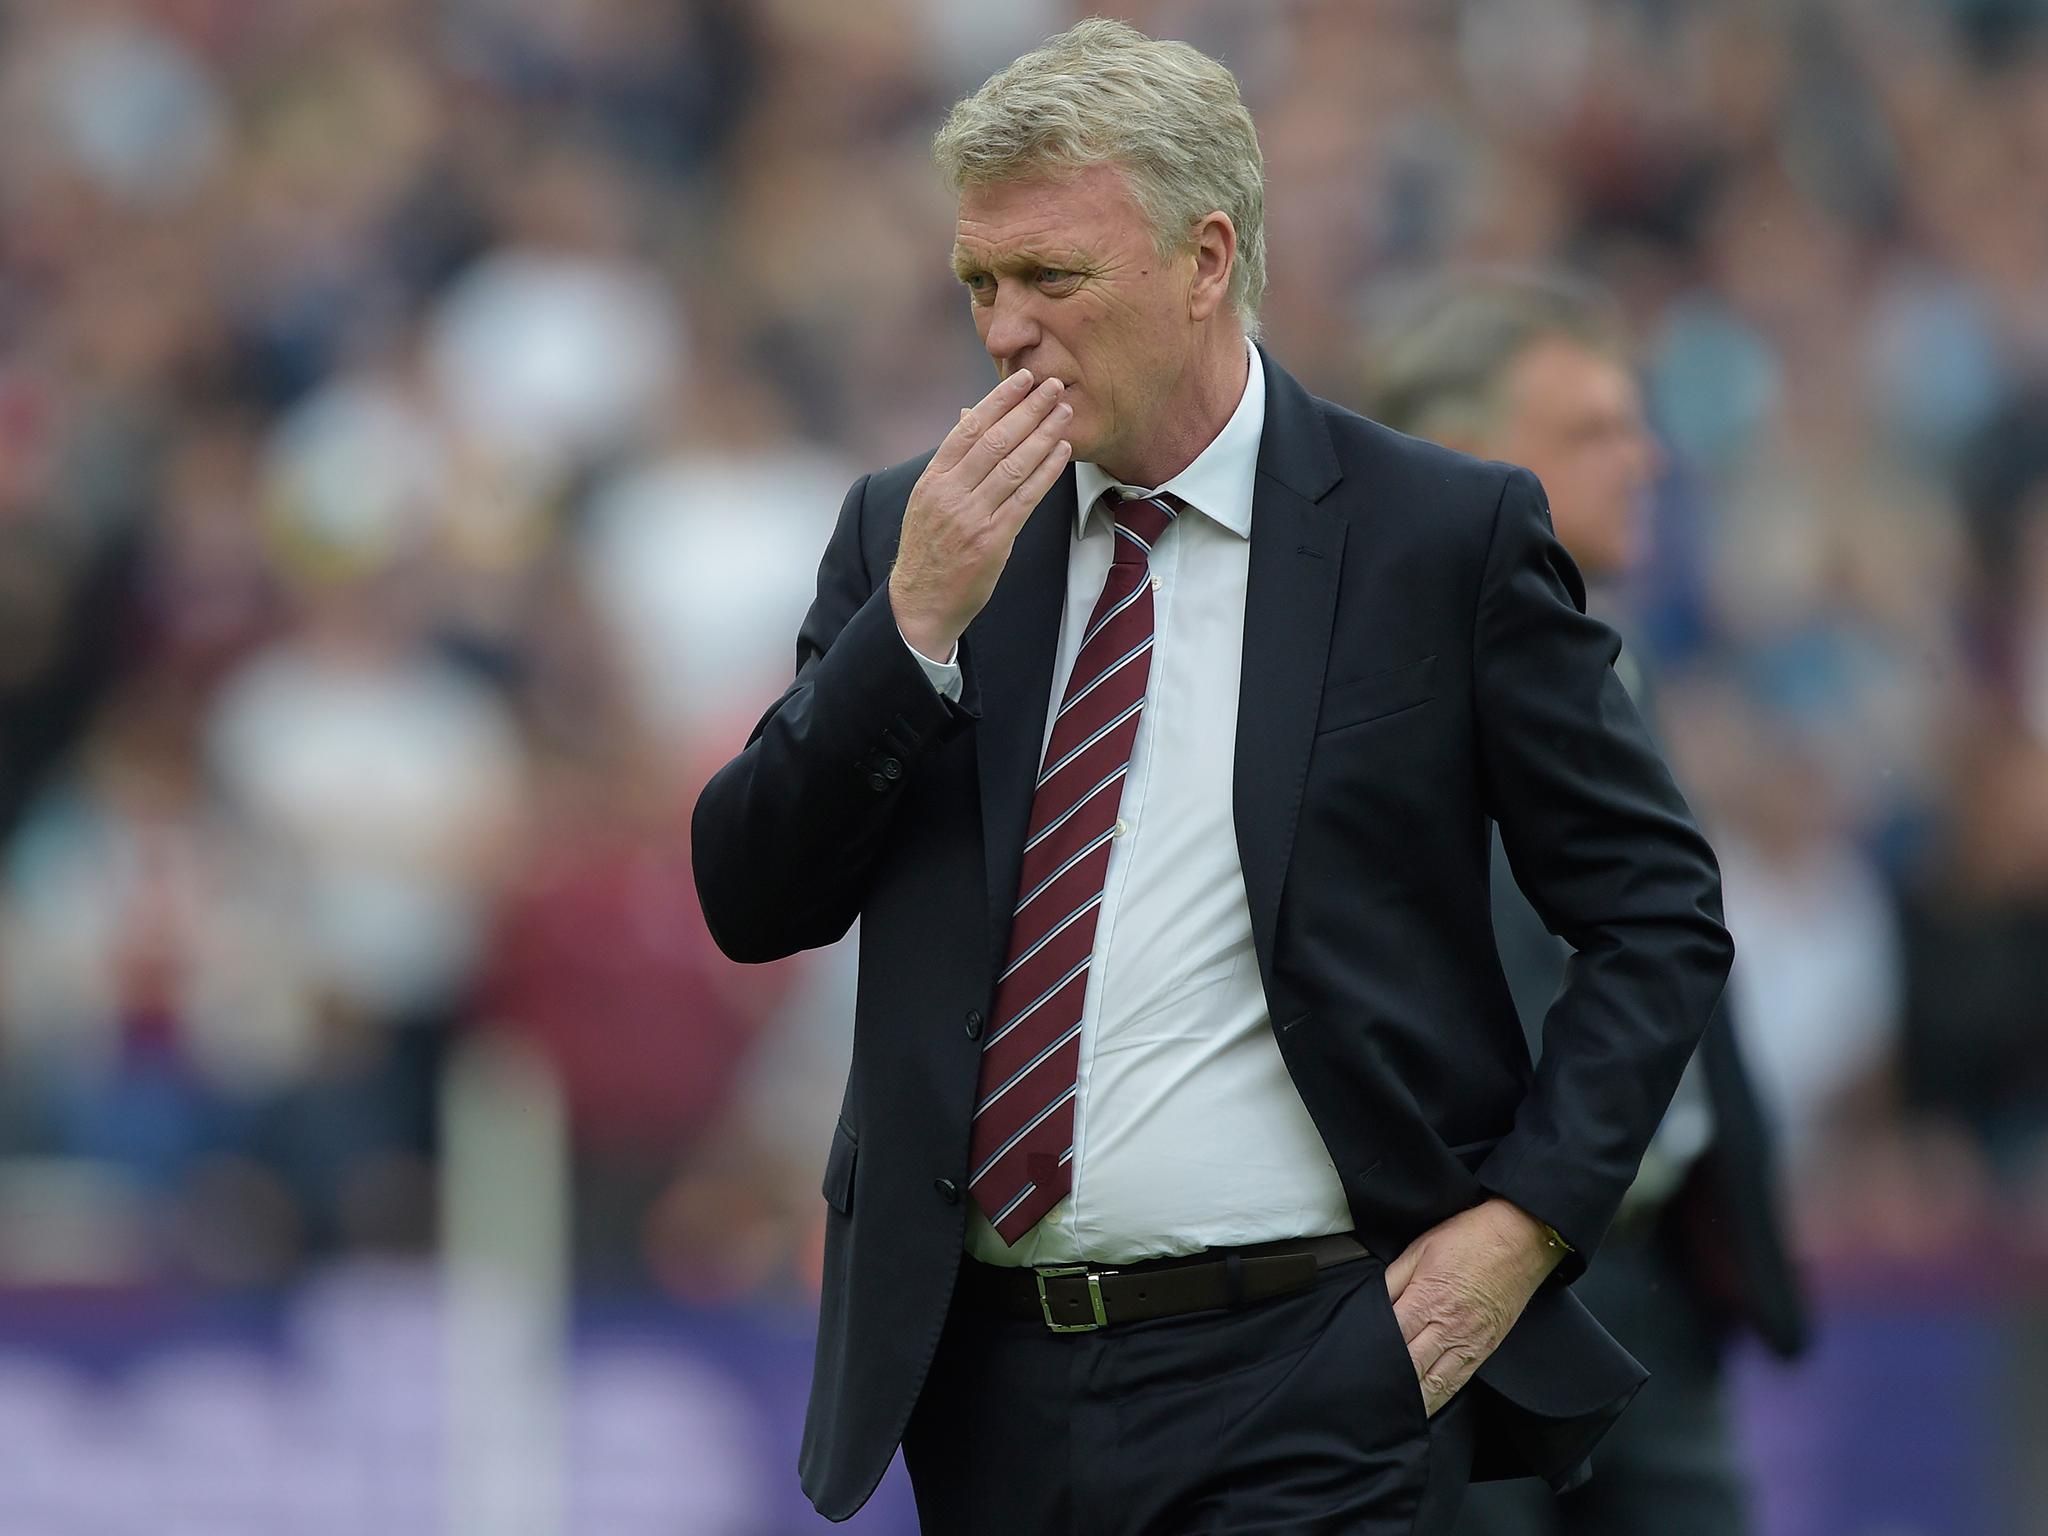 David Moyes’ future at West Ham remains very uncertain